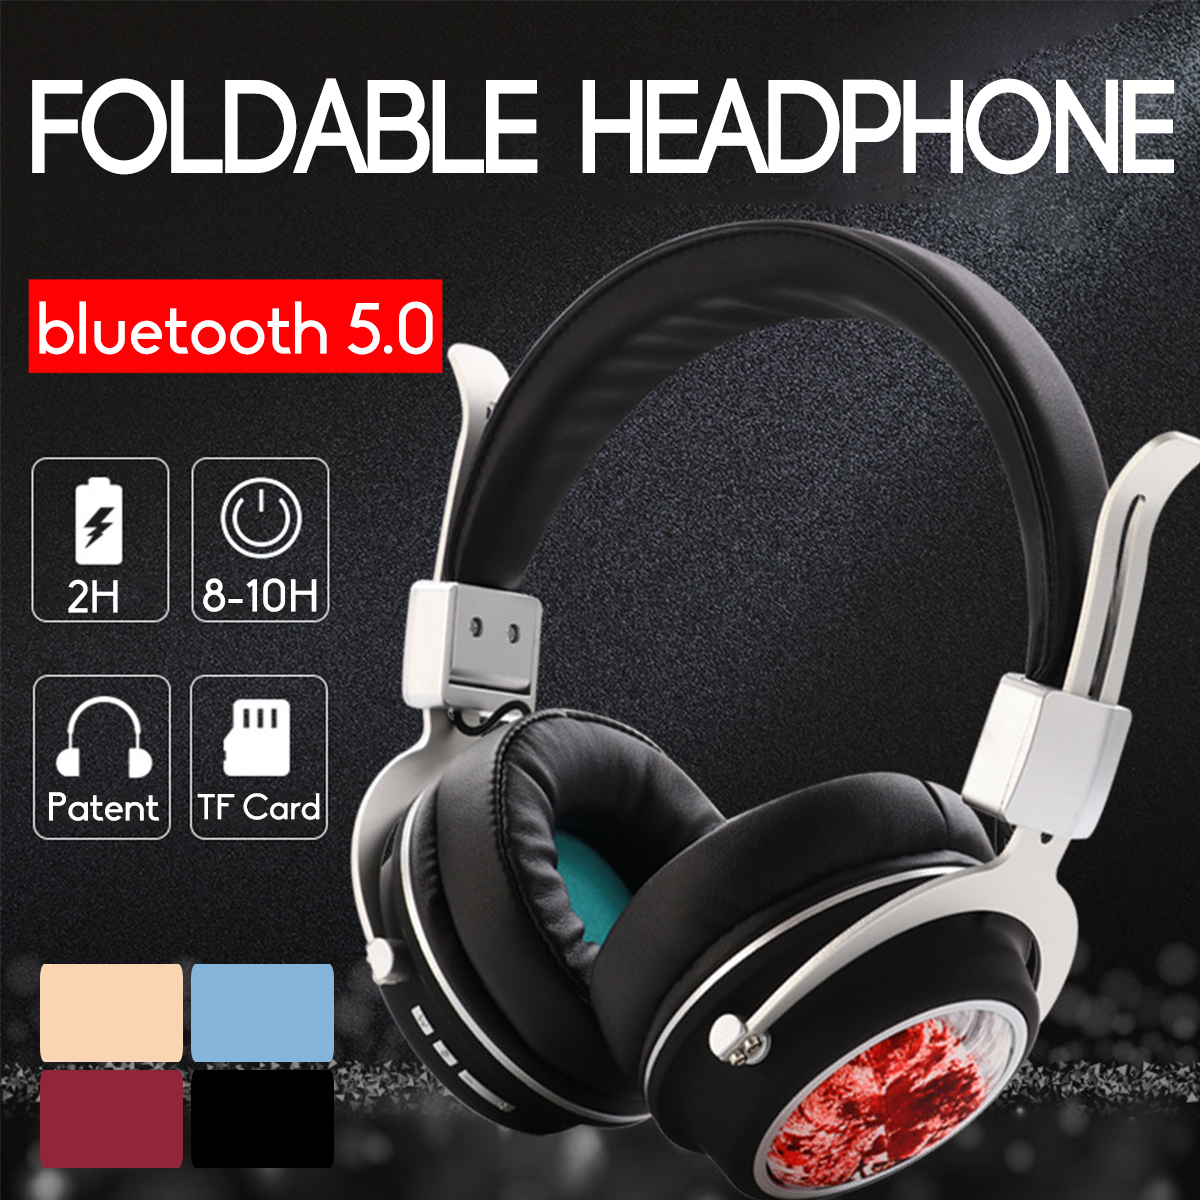 MH5-Wireless-bluetooth-50-Headphone-Foldable-Pattern-3D-Stereo-TF-Card-AUX-Headphone-with-Mic-1477112-1